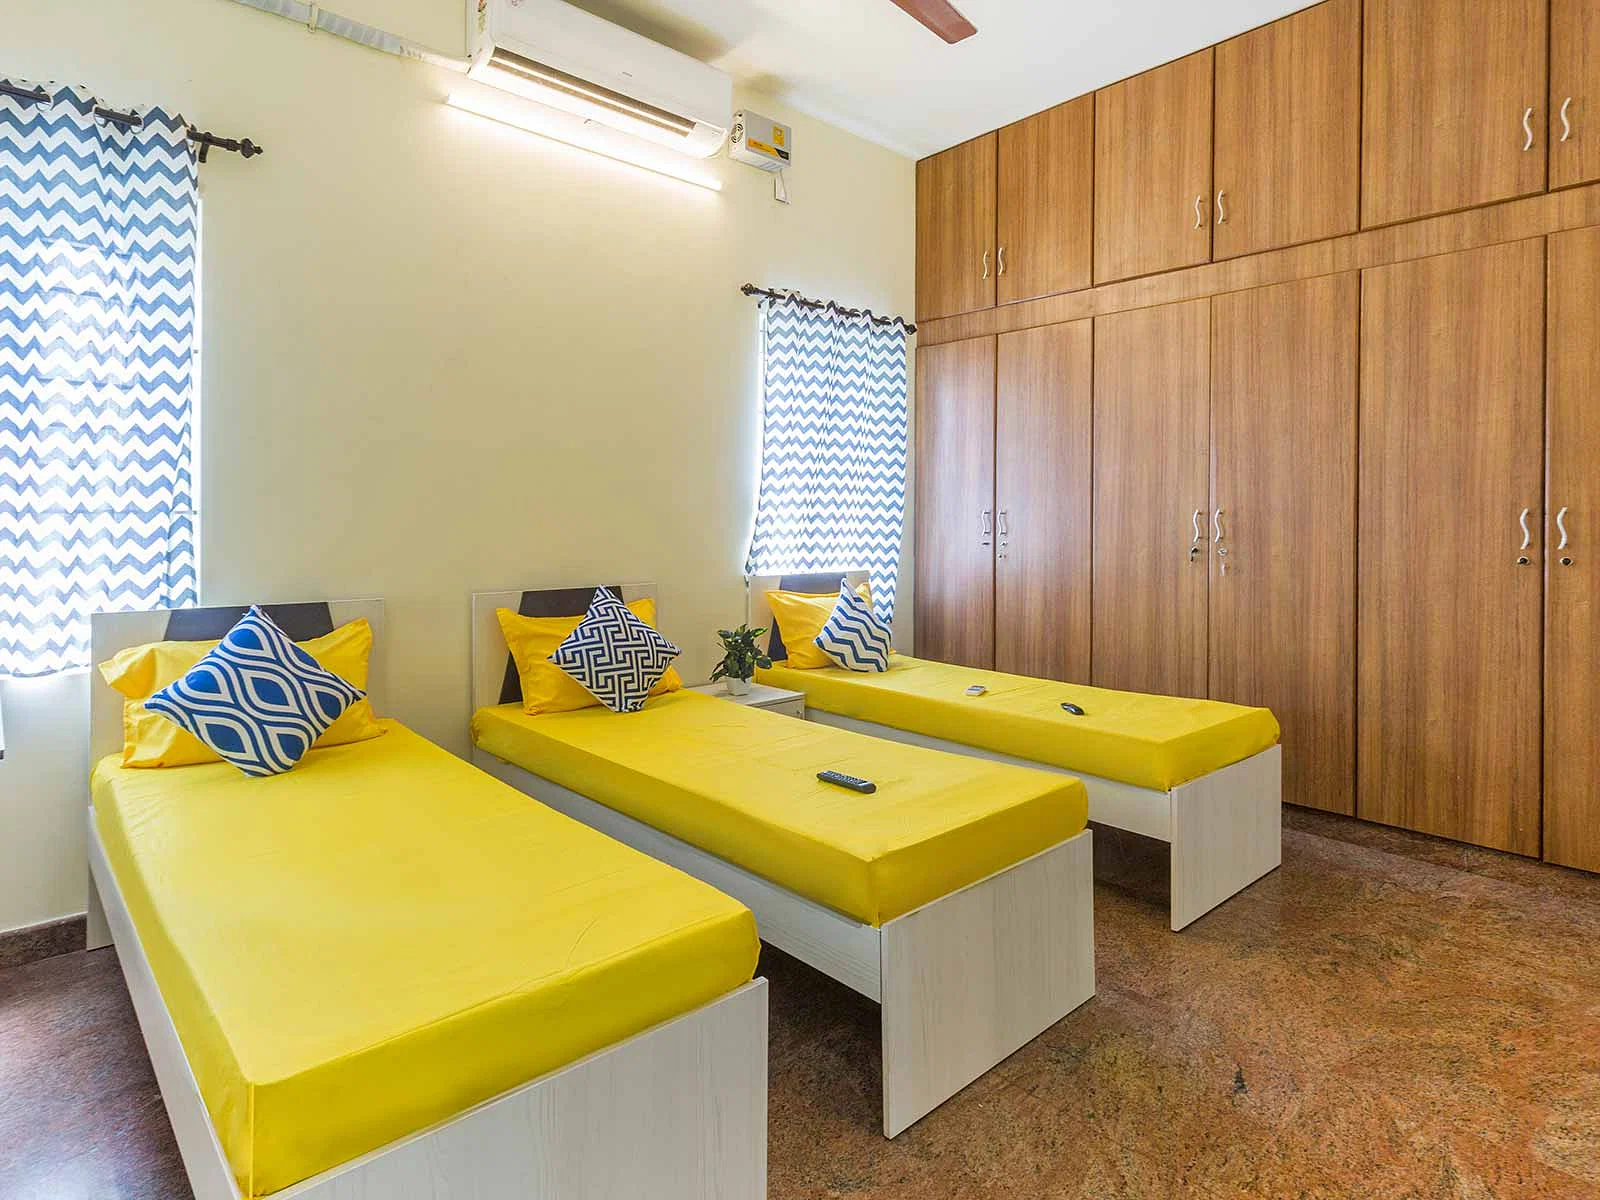 budget-friendly PGs and hostels for boys with single rooms with daily hopusekeeping-Zolo Upstream